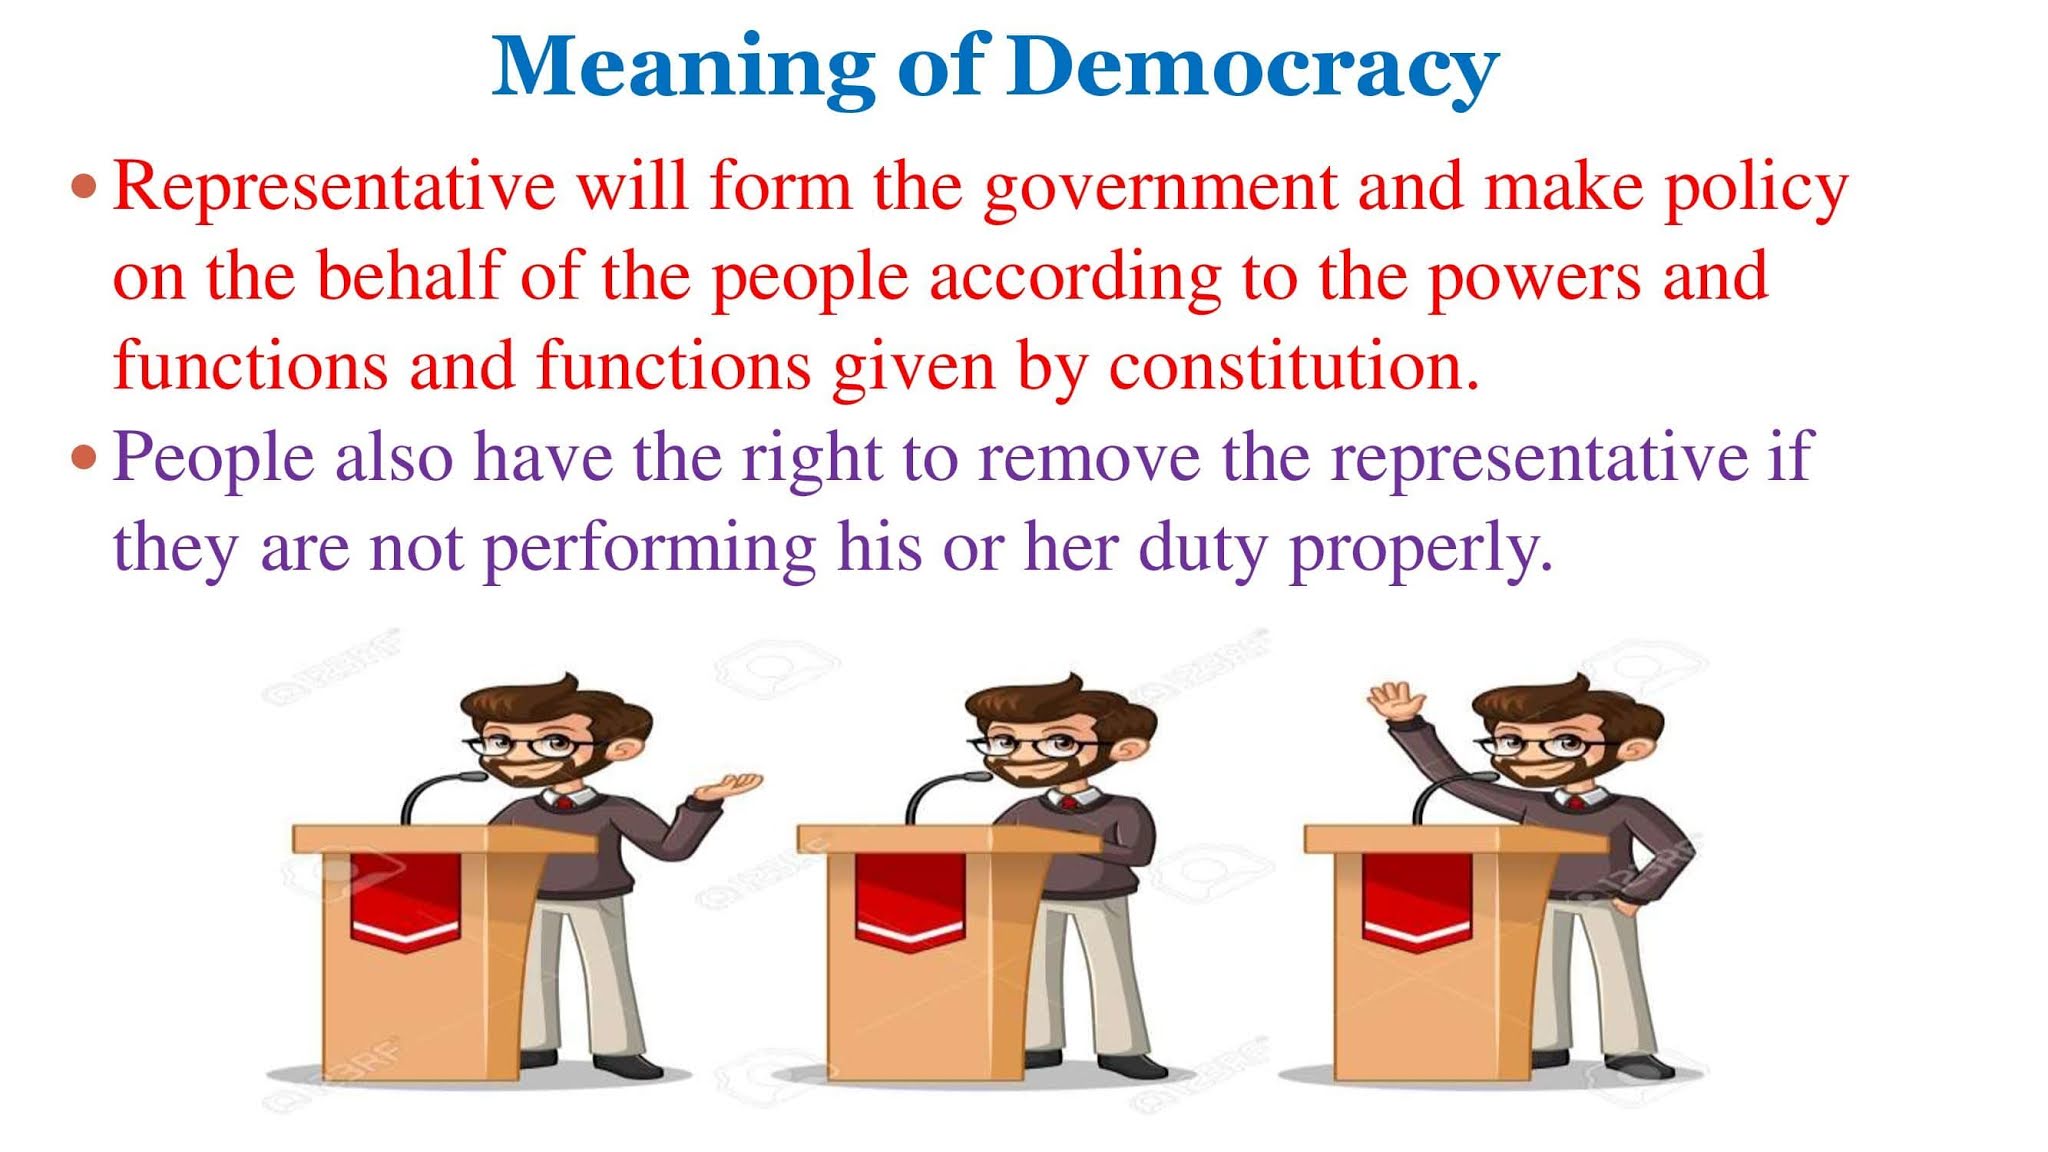 essay on democracy for 9th class